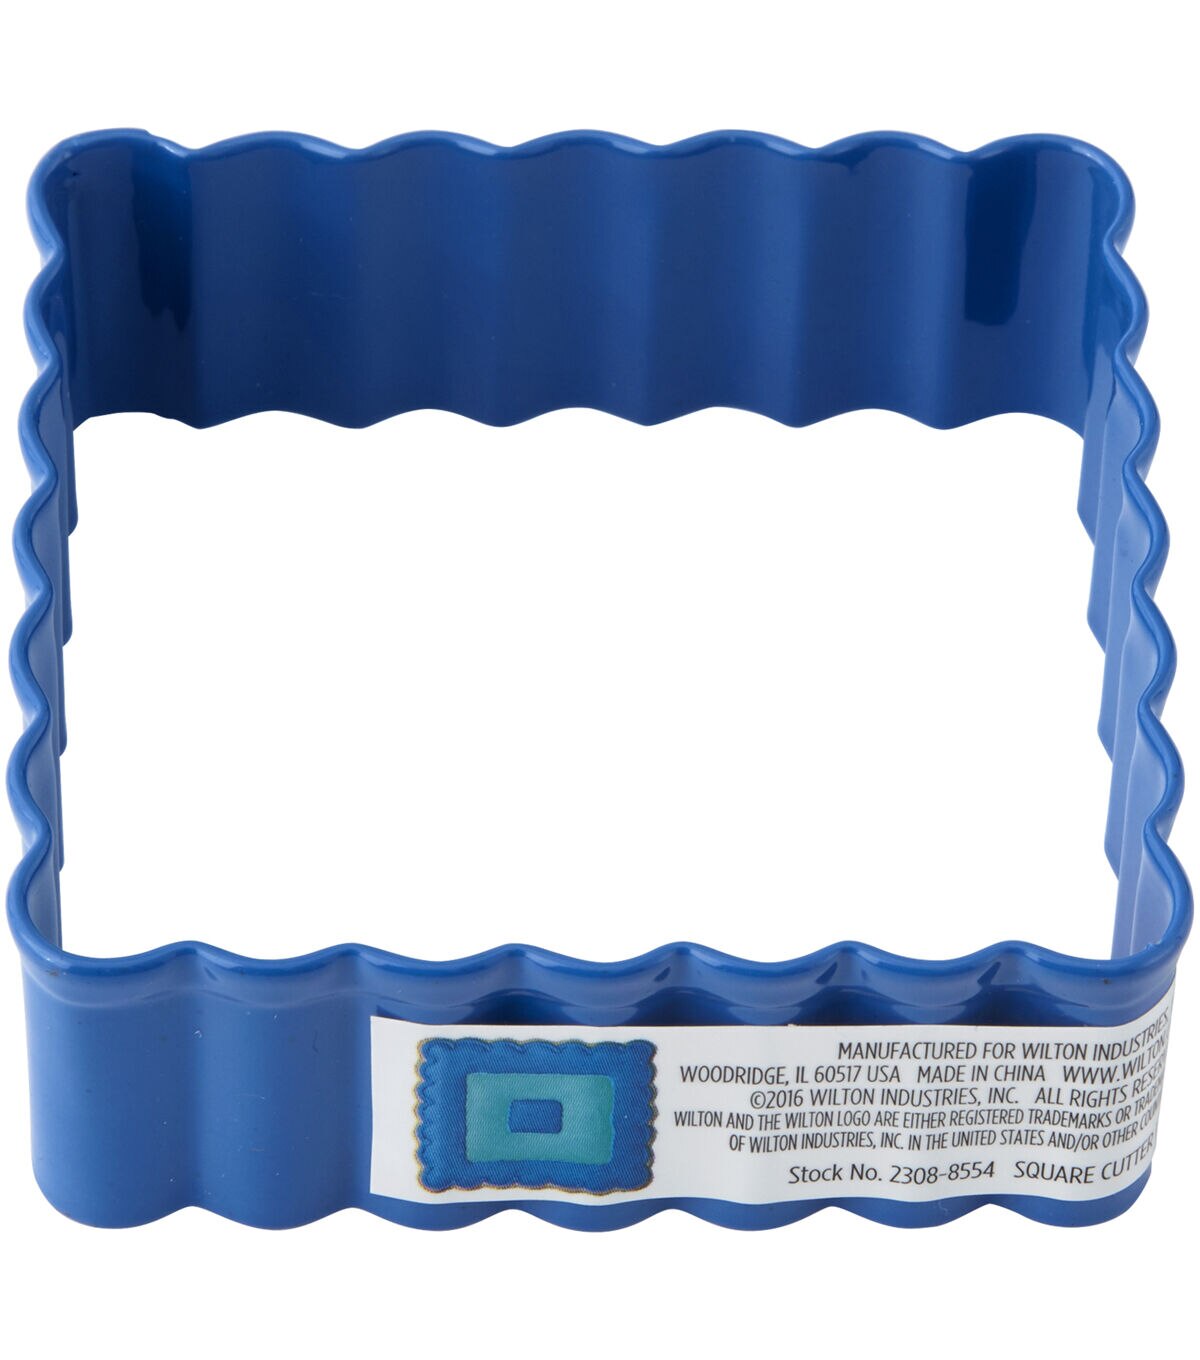 Scalloped Edge Fondant Cookie Cutter and Stamp #1159